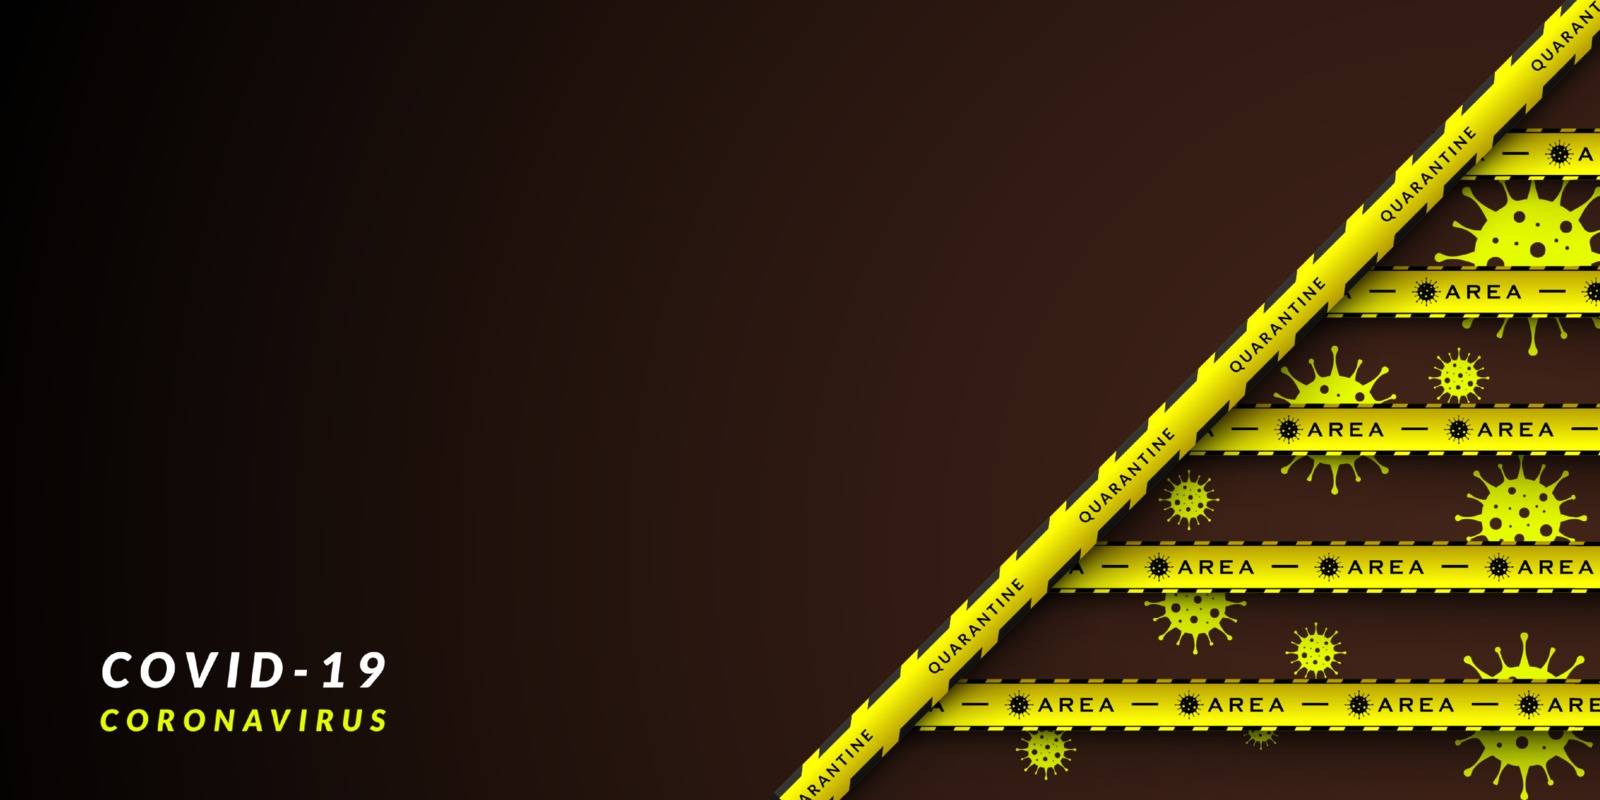 Vector design of corona virus danger warning in yellow and black stripes. Background with copy space. Dividing area Covid-19, quarantine, lockdown. by templator